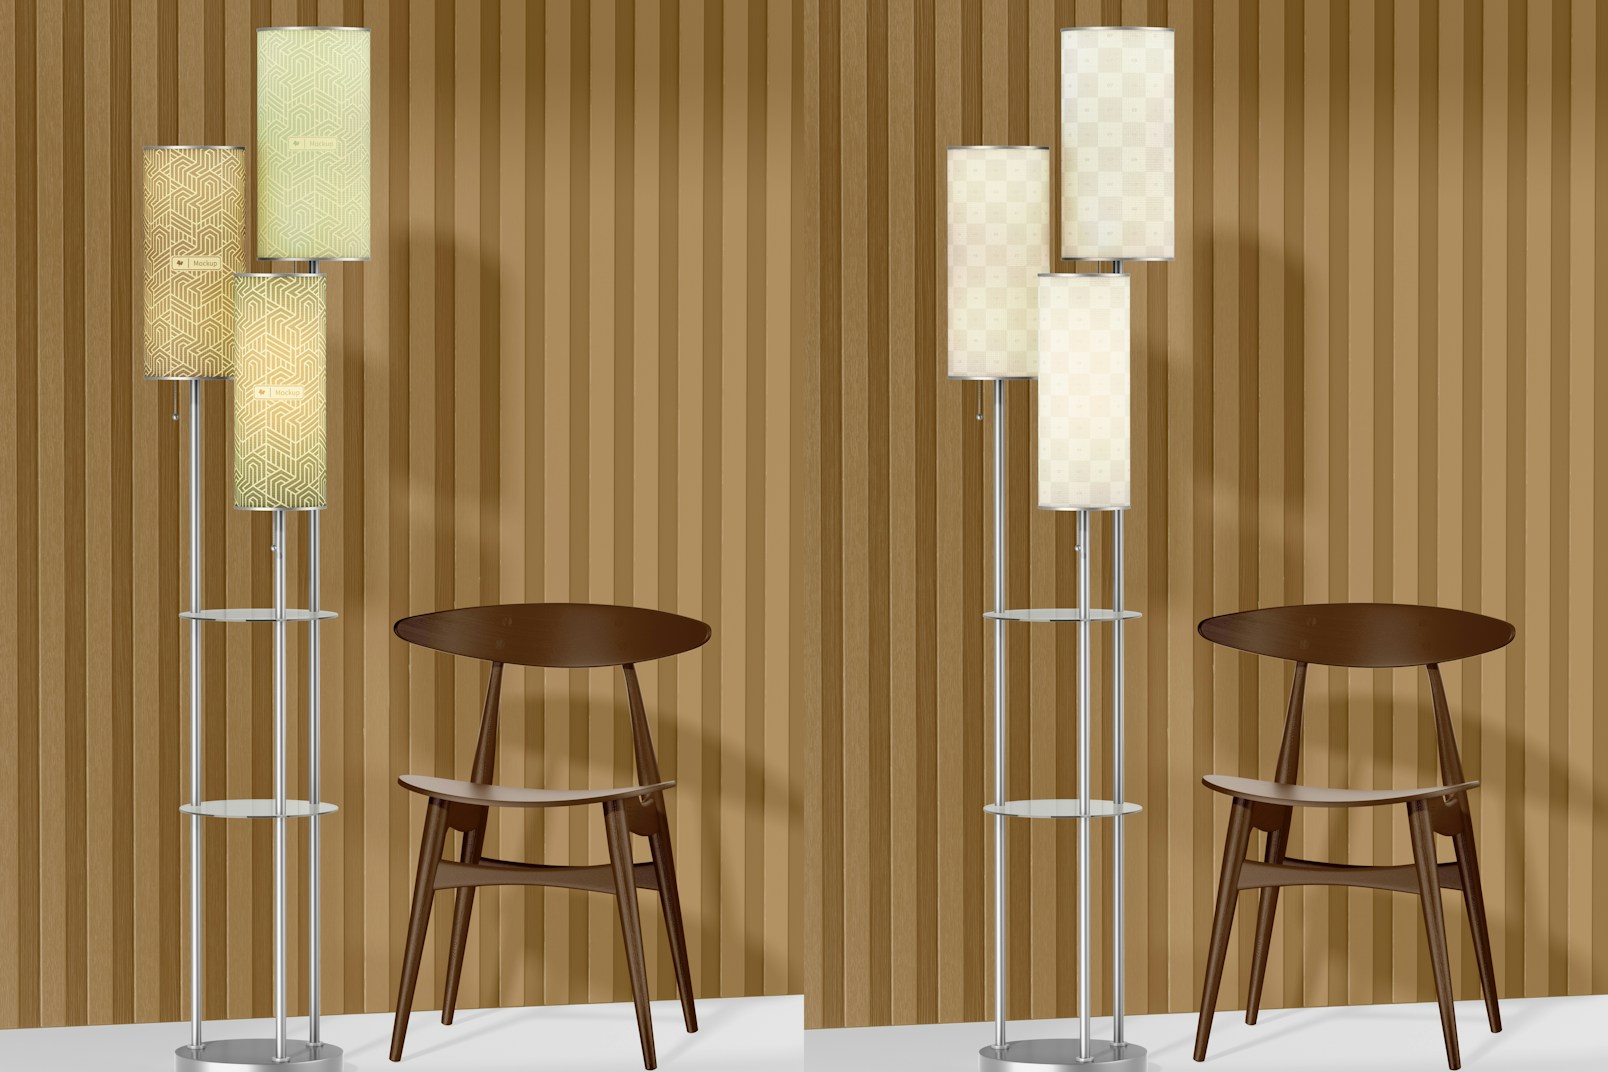 Floor Lamp Trio Mockup, with Chair